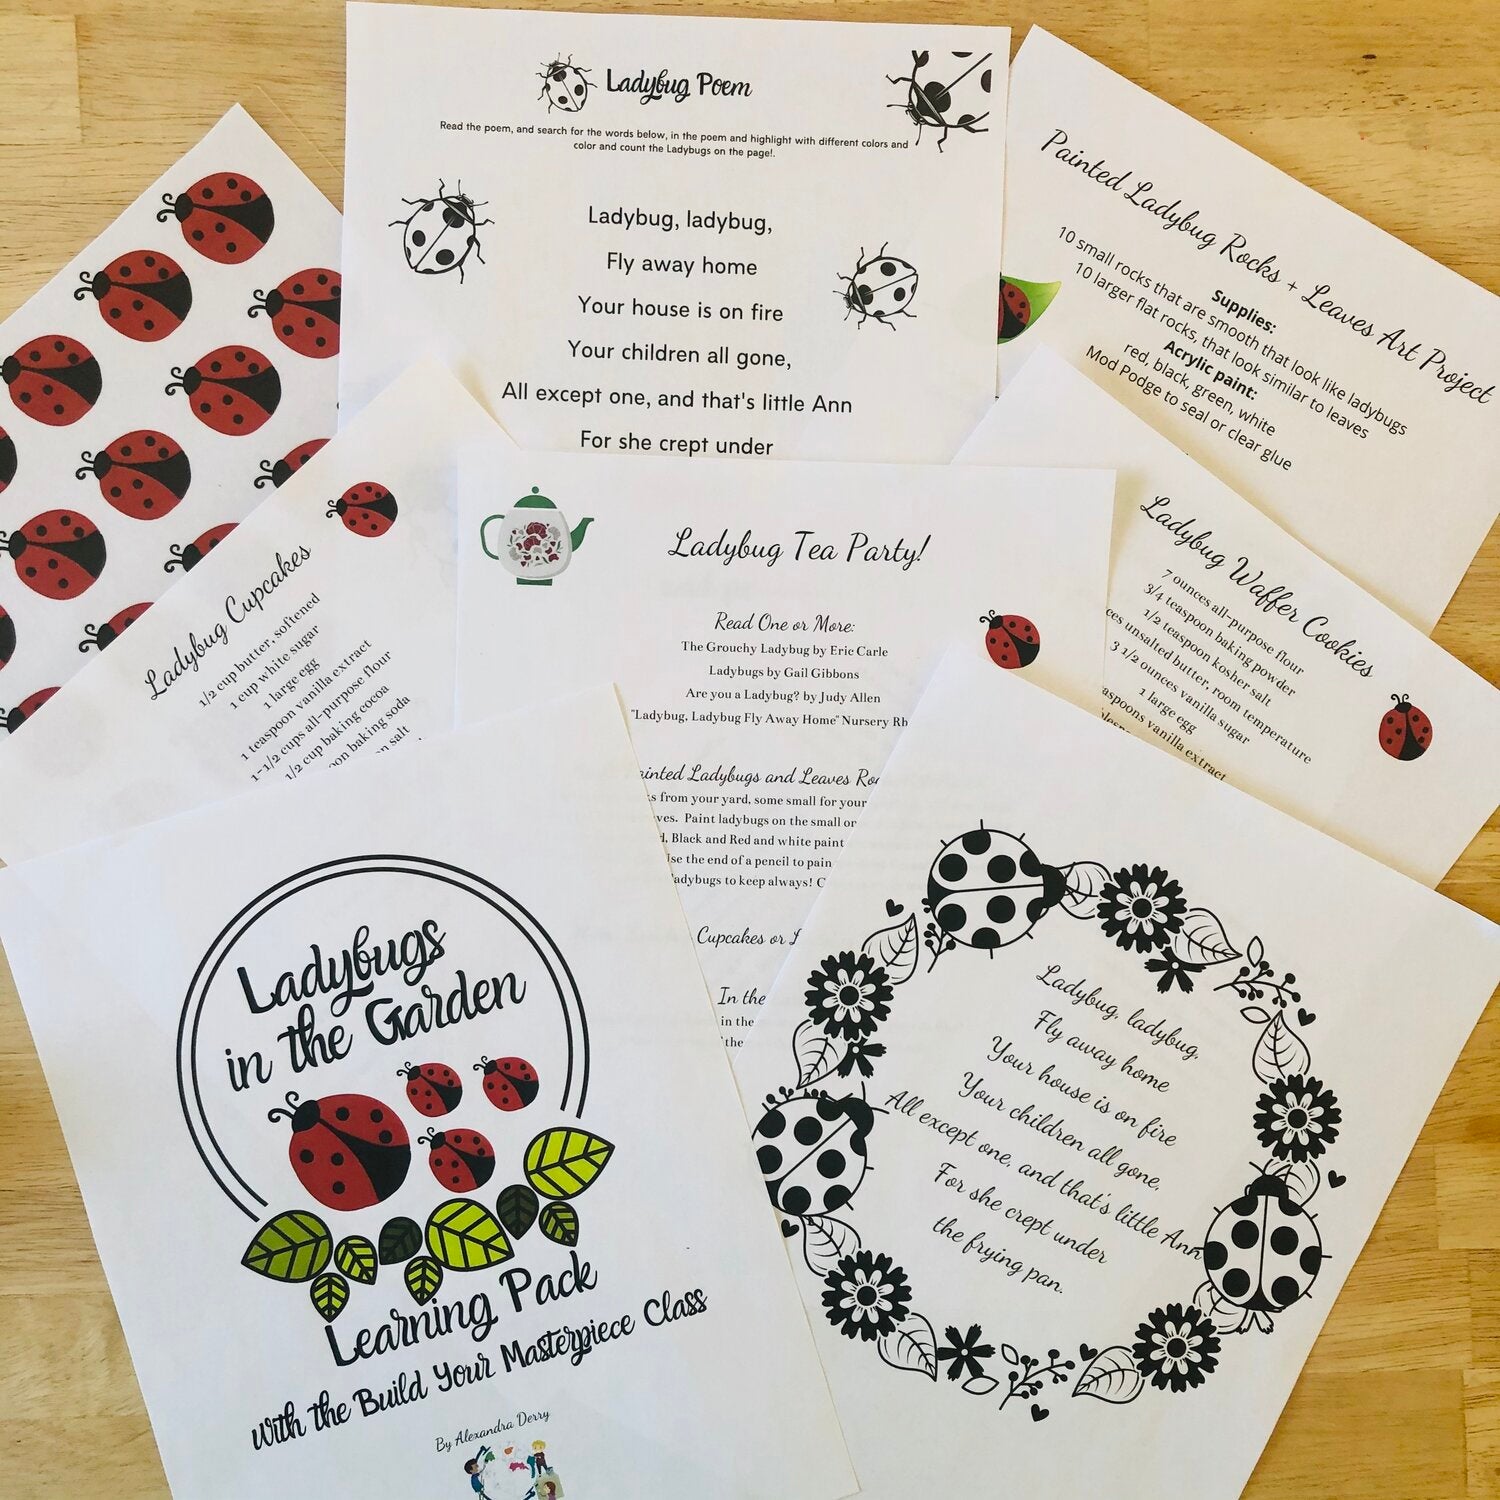 Ladybugs in the Garden Learning Pack